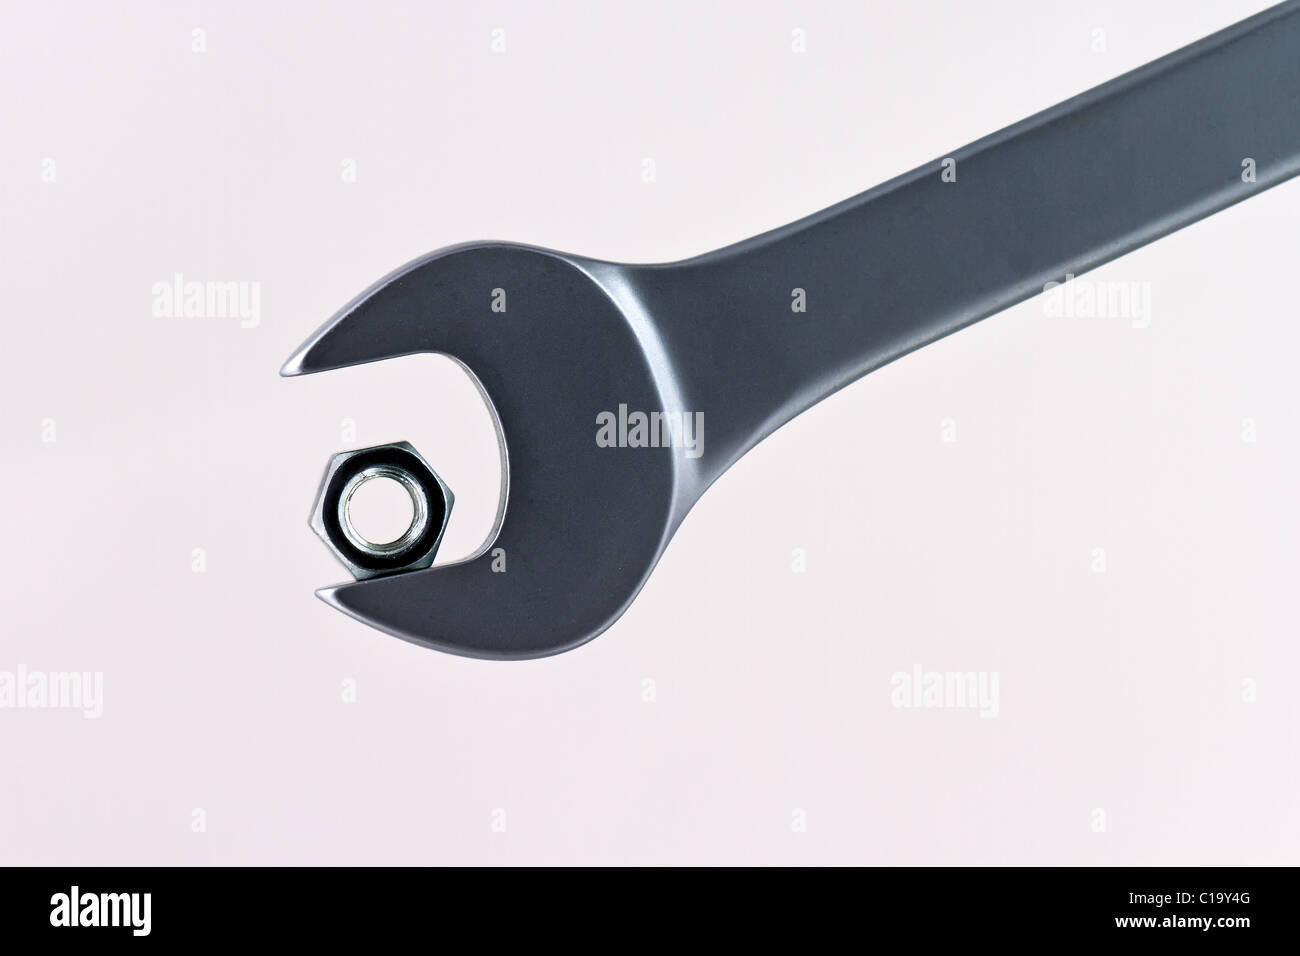 A too big wrench for nut. Symbolizing failure, problems, challenge or success. Stock Photo